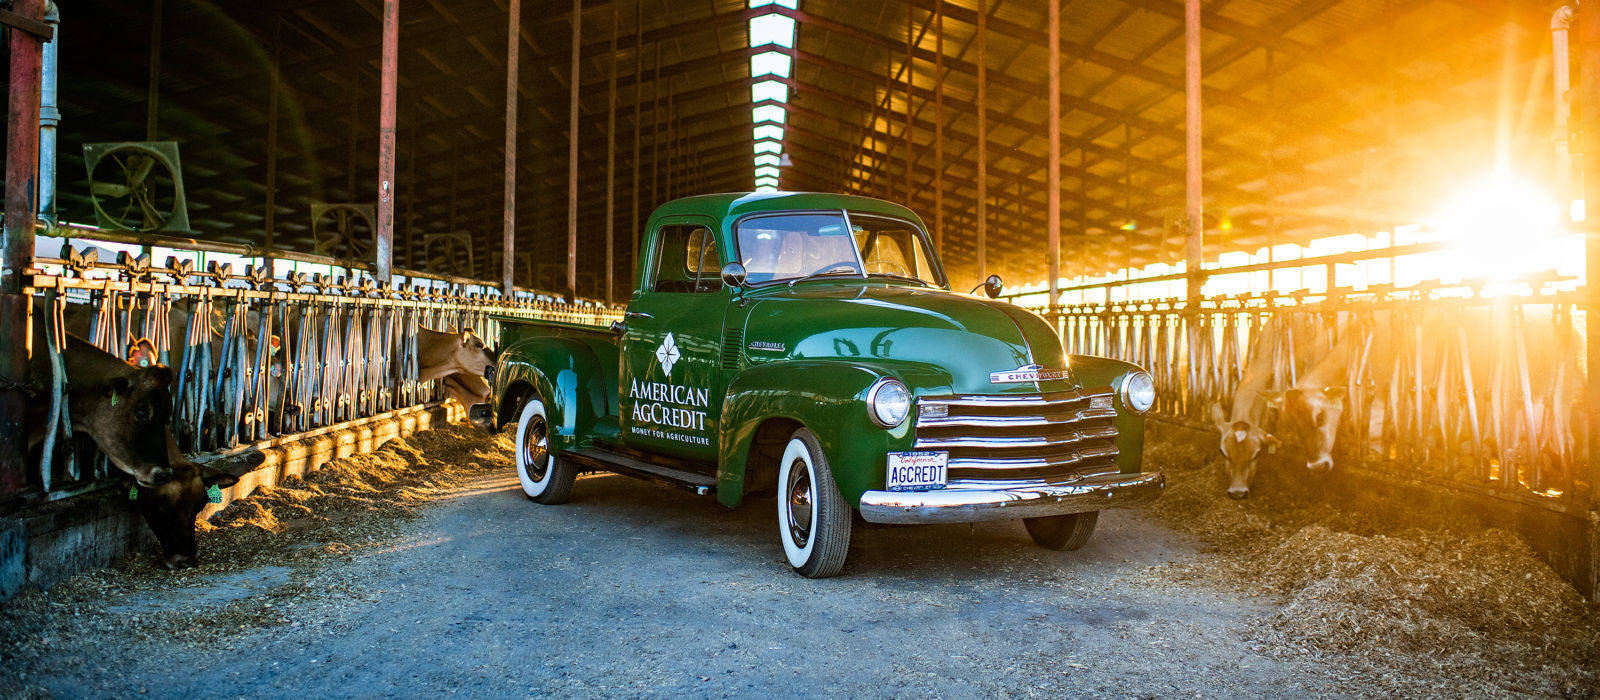 American AgCredit truck in dairy barn at sunset